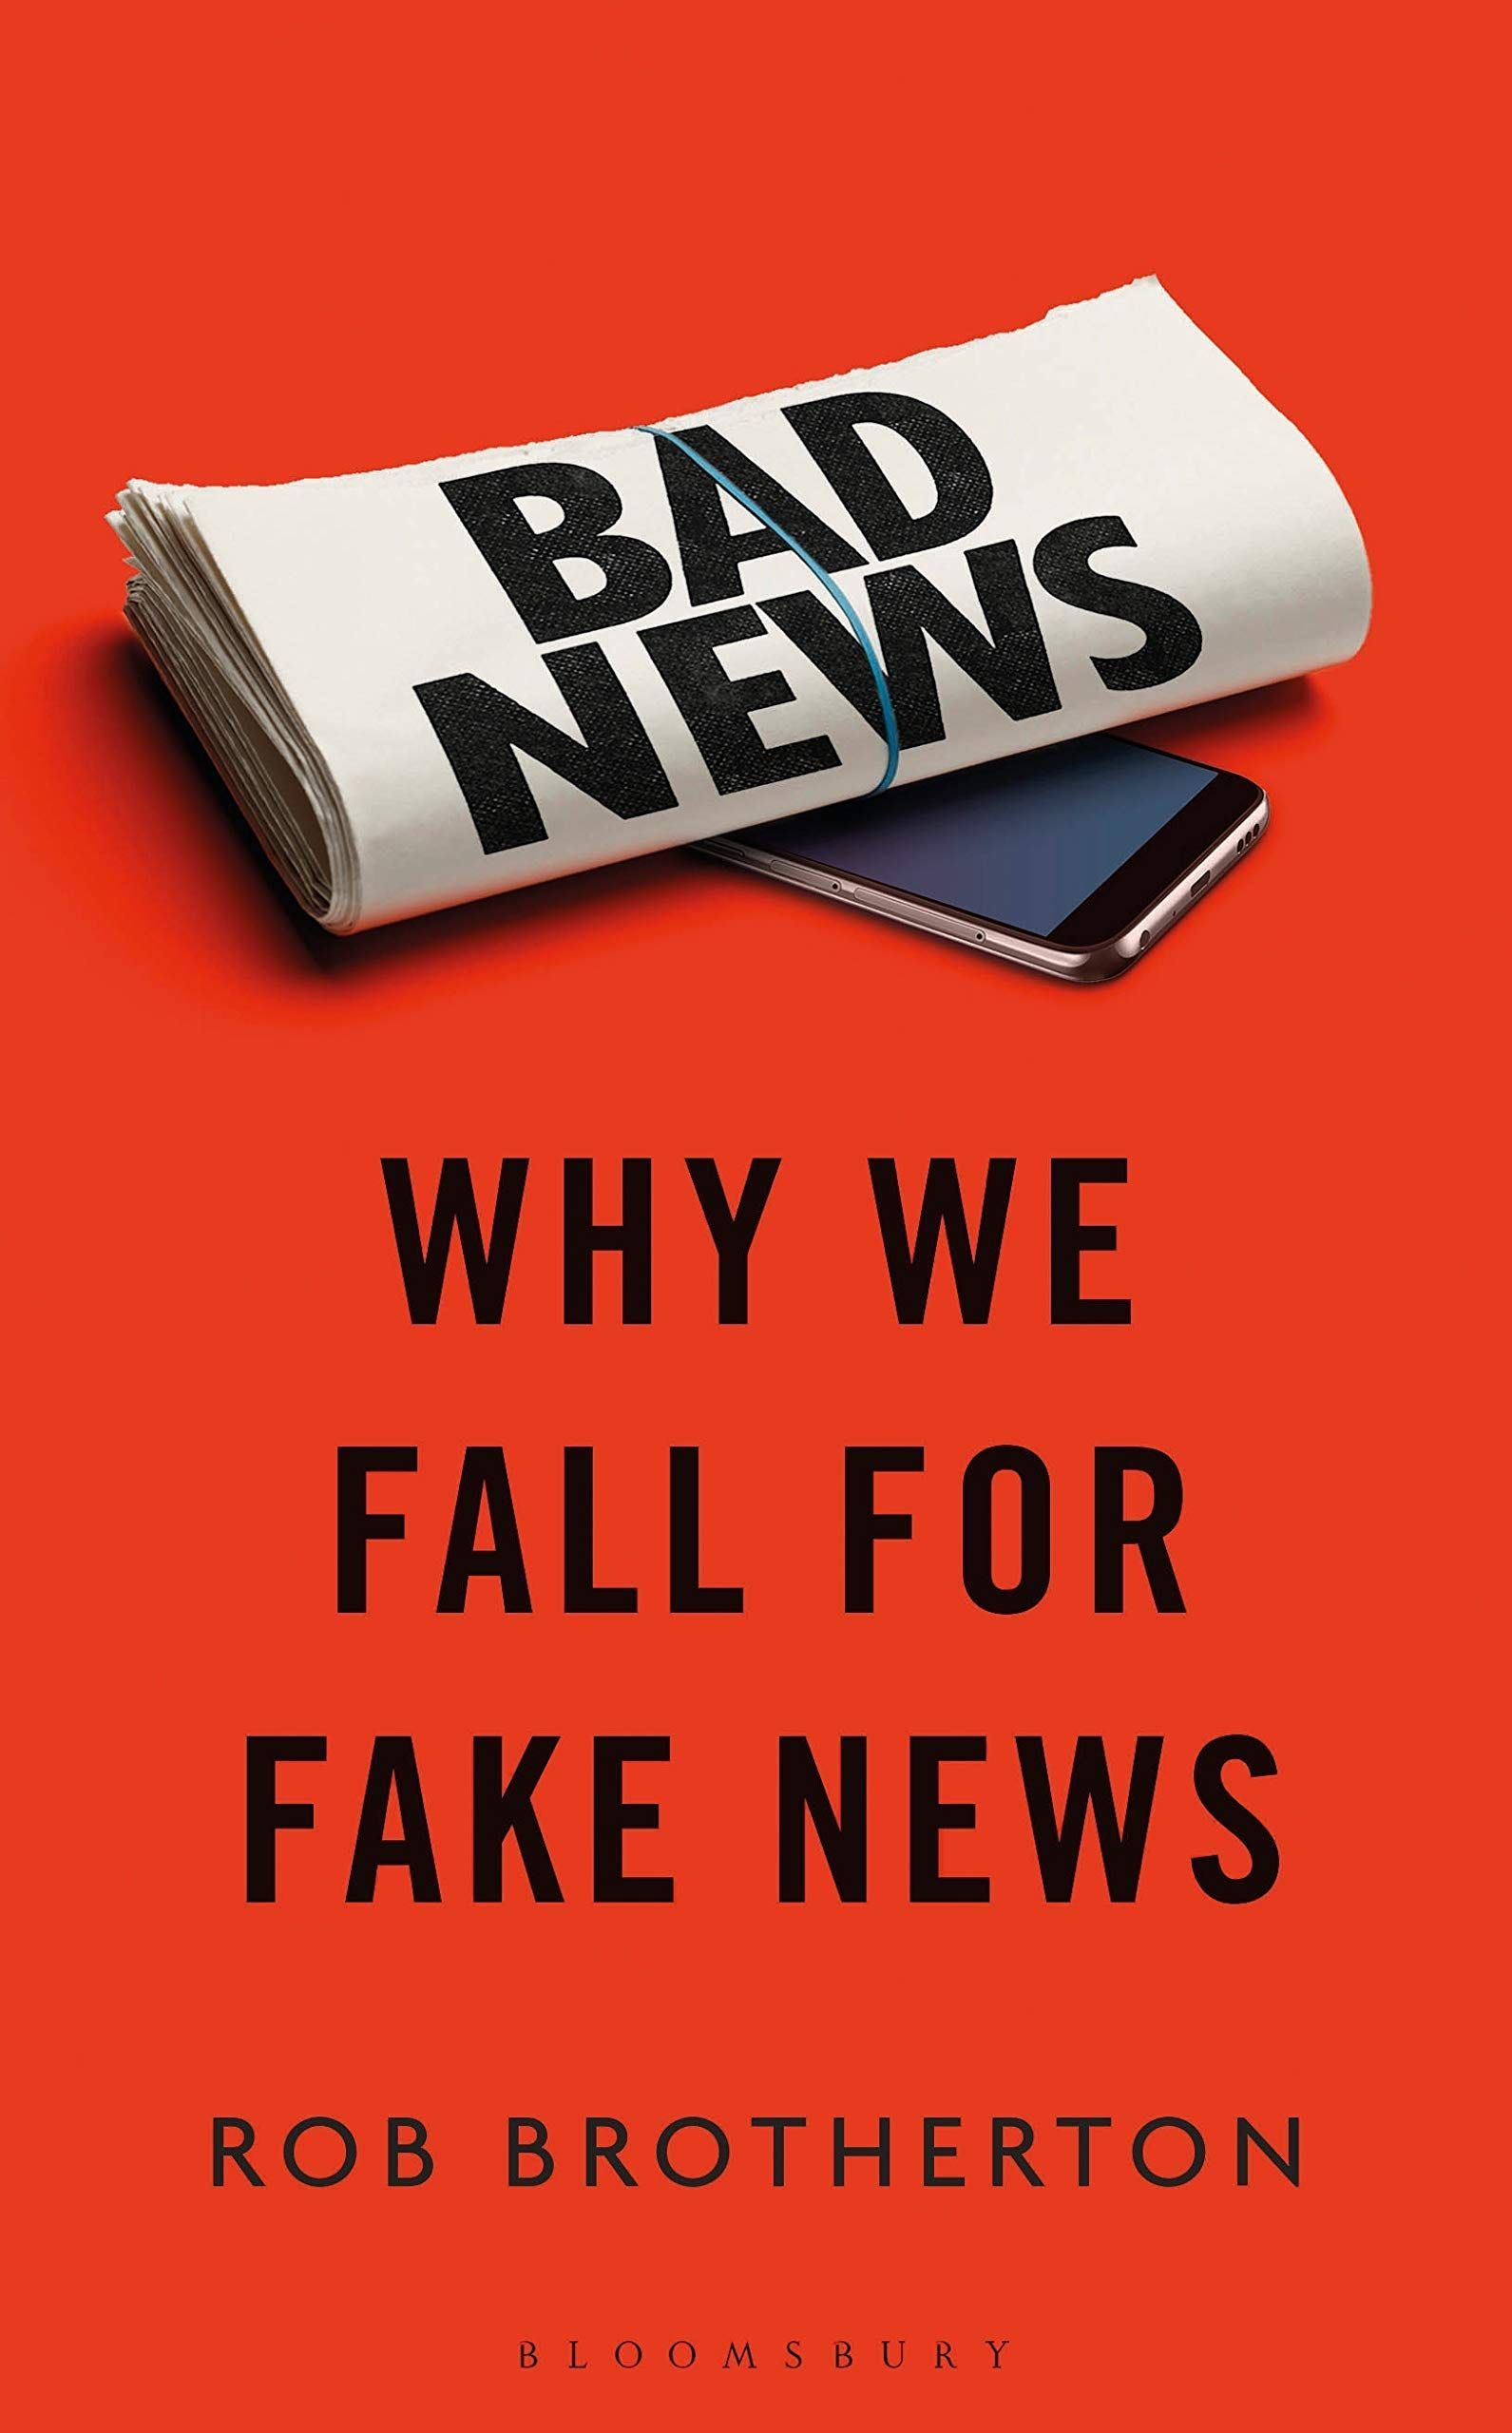 Truth Itself Becomes Suspicious: On Rob Brotherton’s “Bad News: Why We Fall for Fake News”